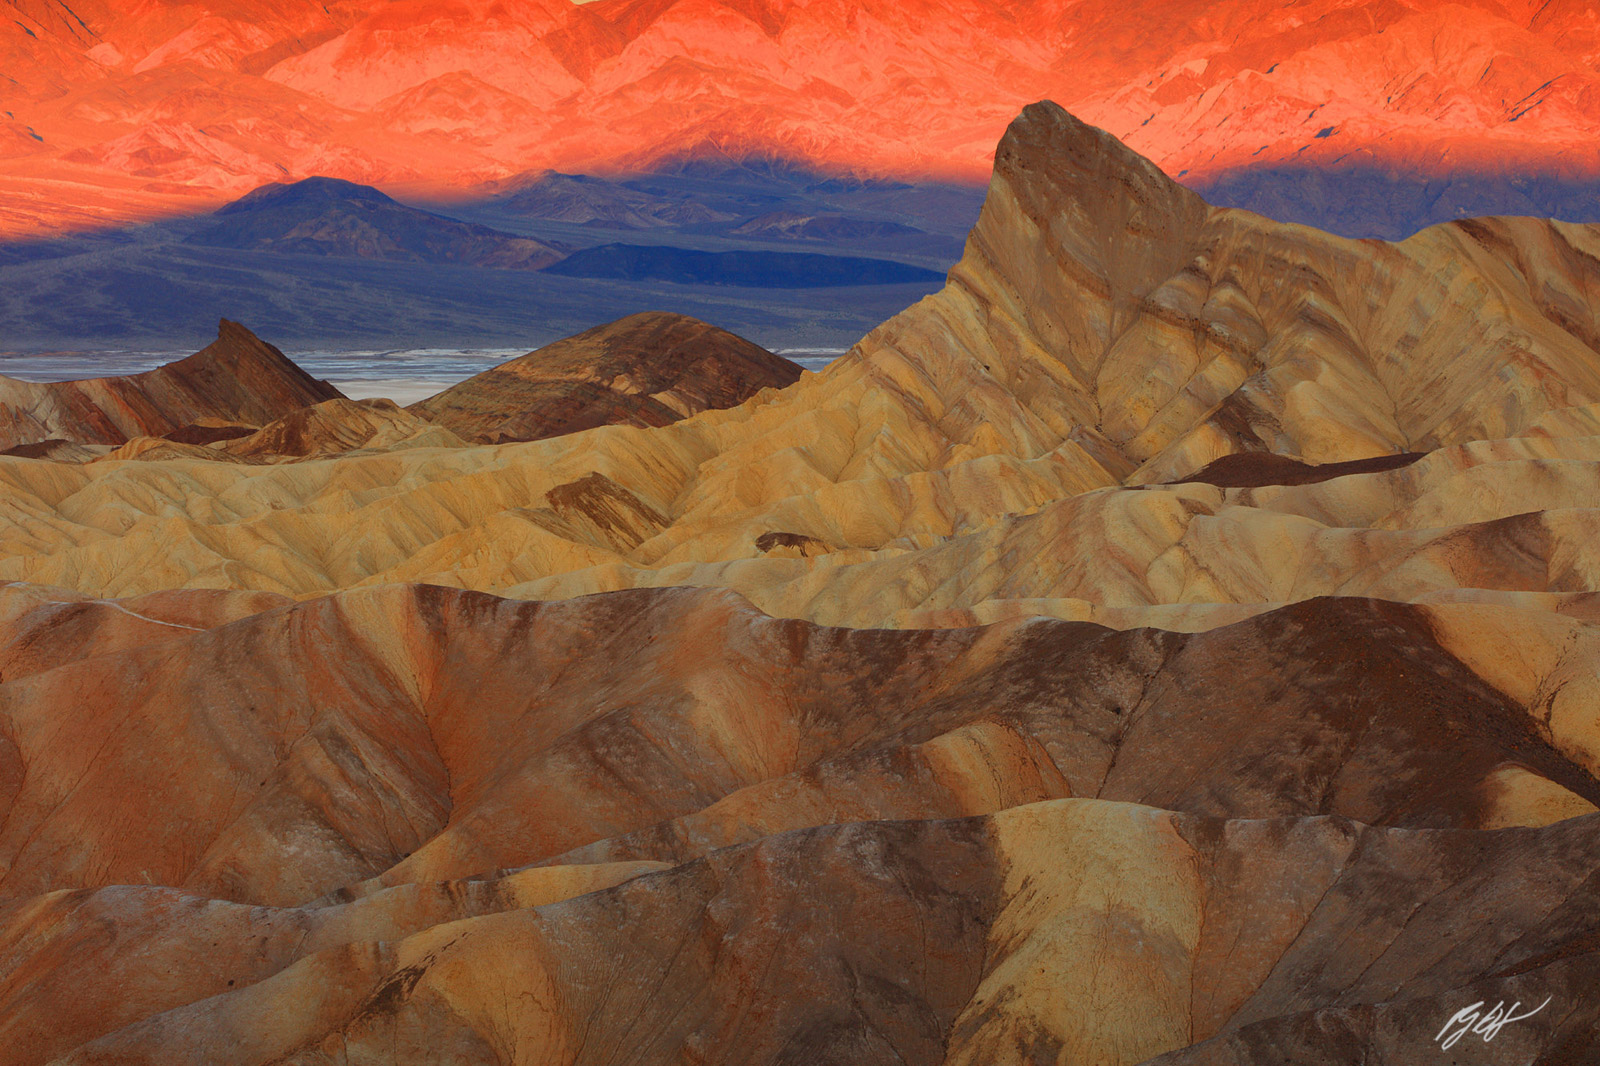 Sunrise Manly Beacon from Zabriskie Point in Death Valley National Park in California